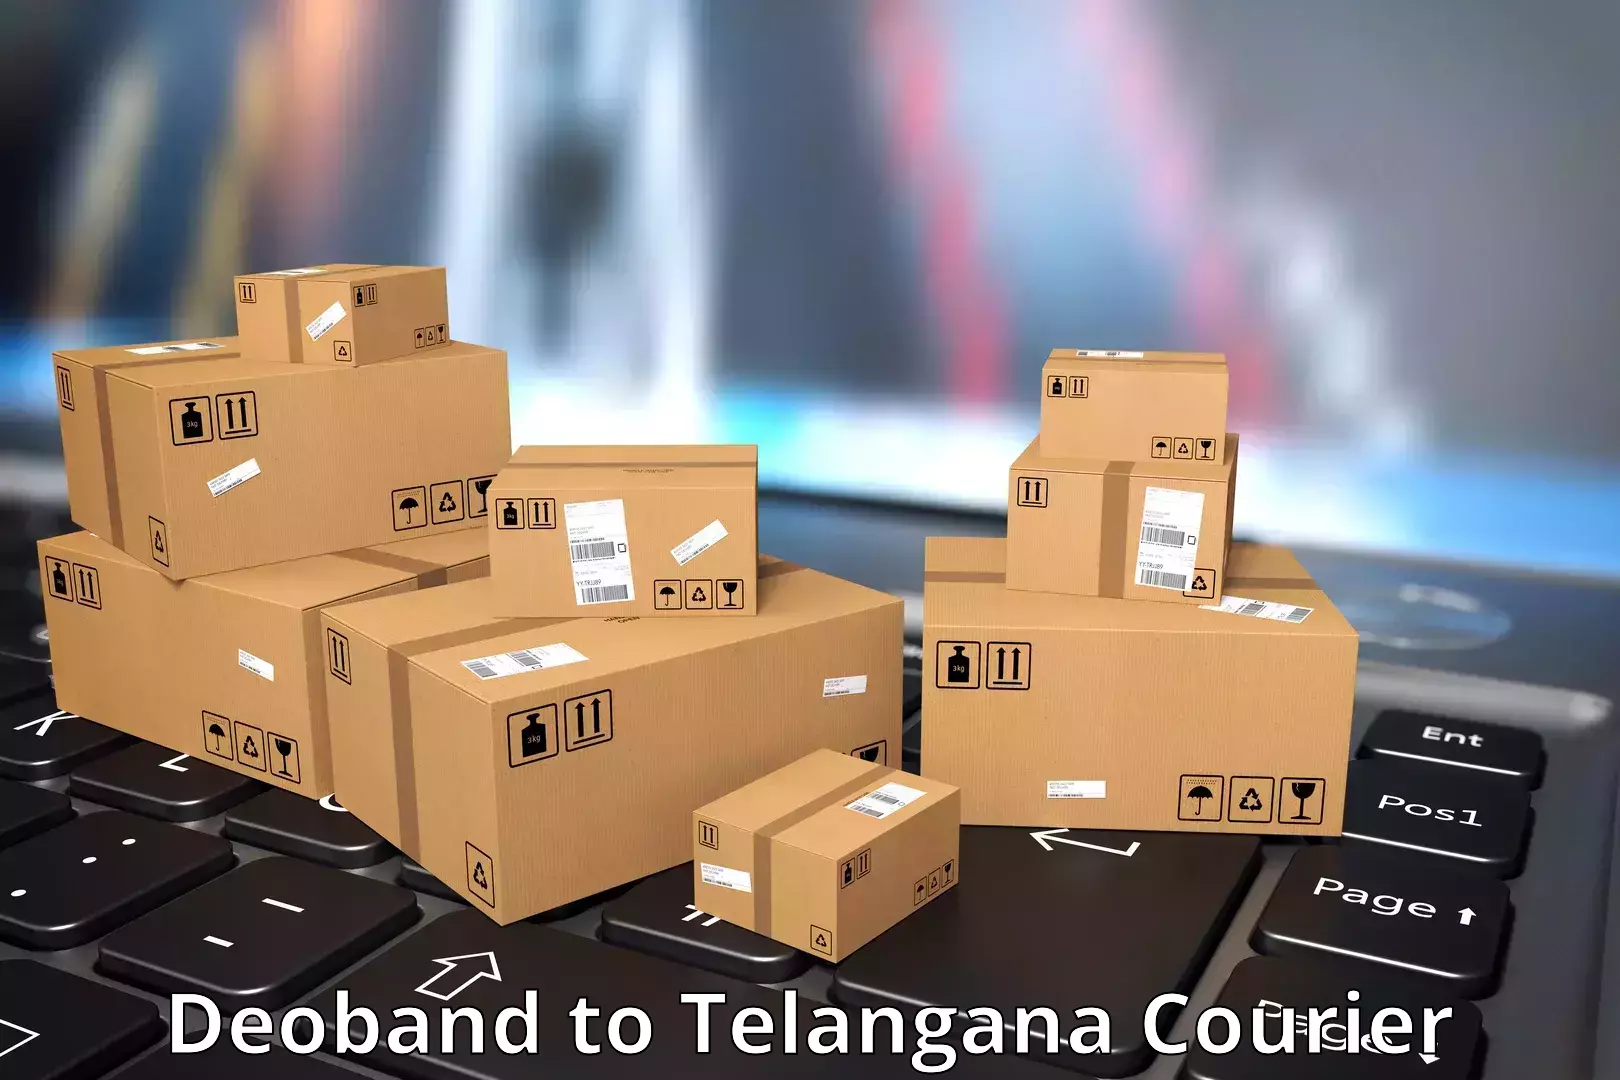 Reliable shipping partners Deoband to Telangana